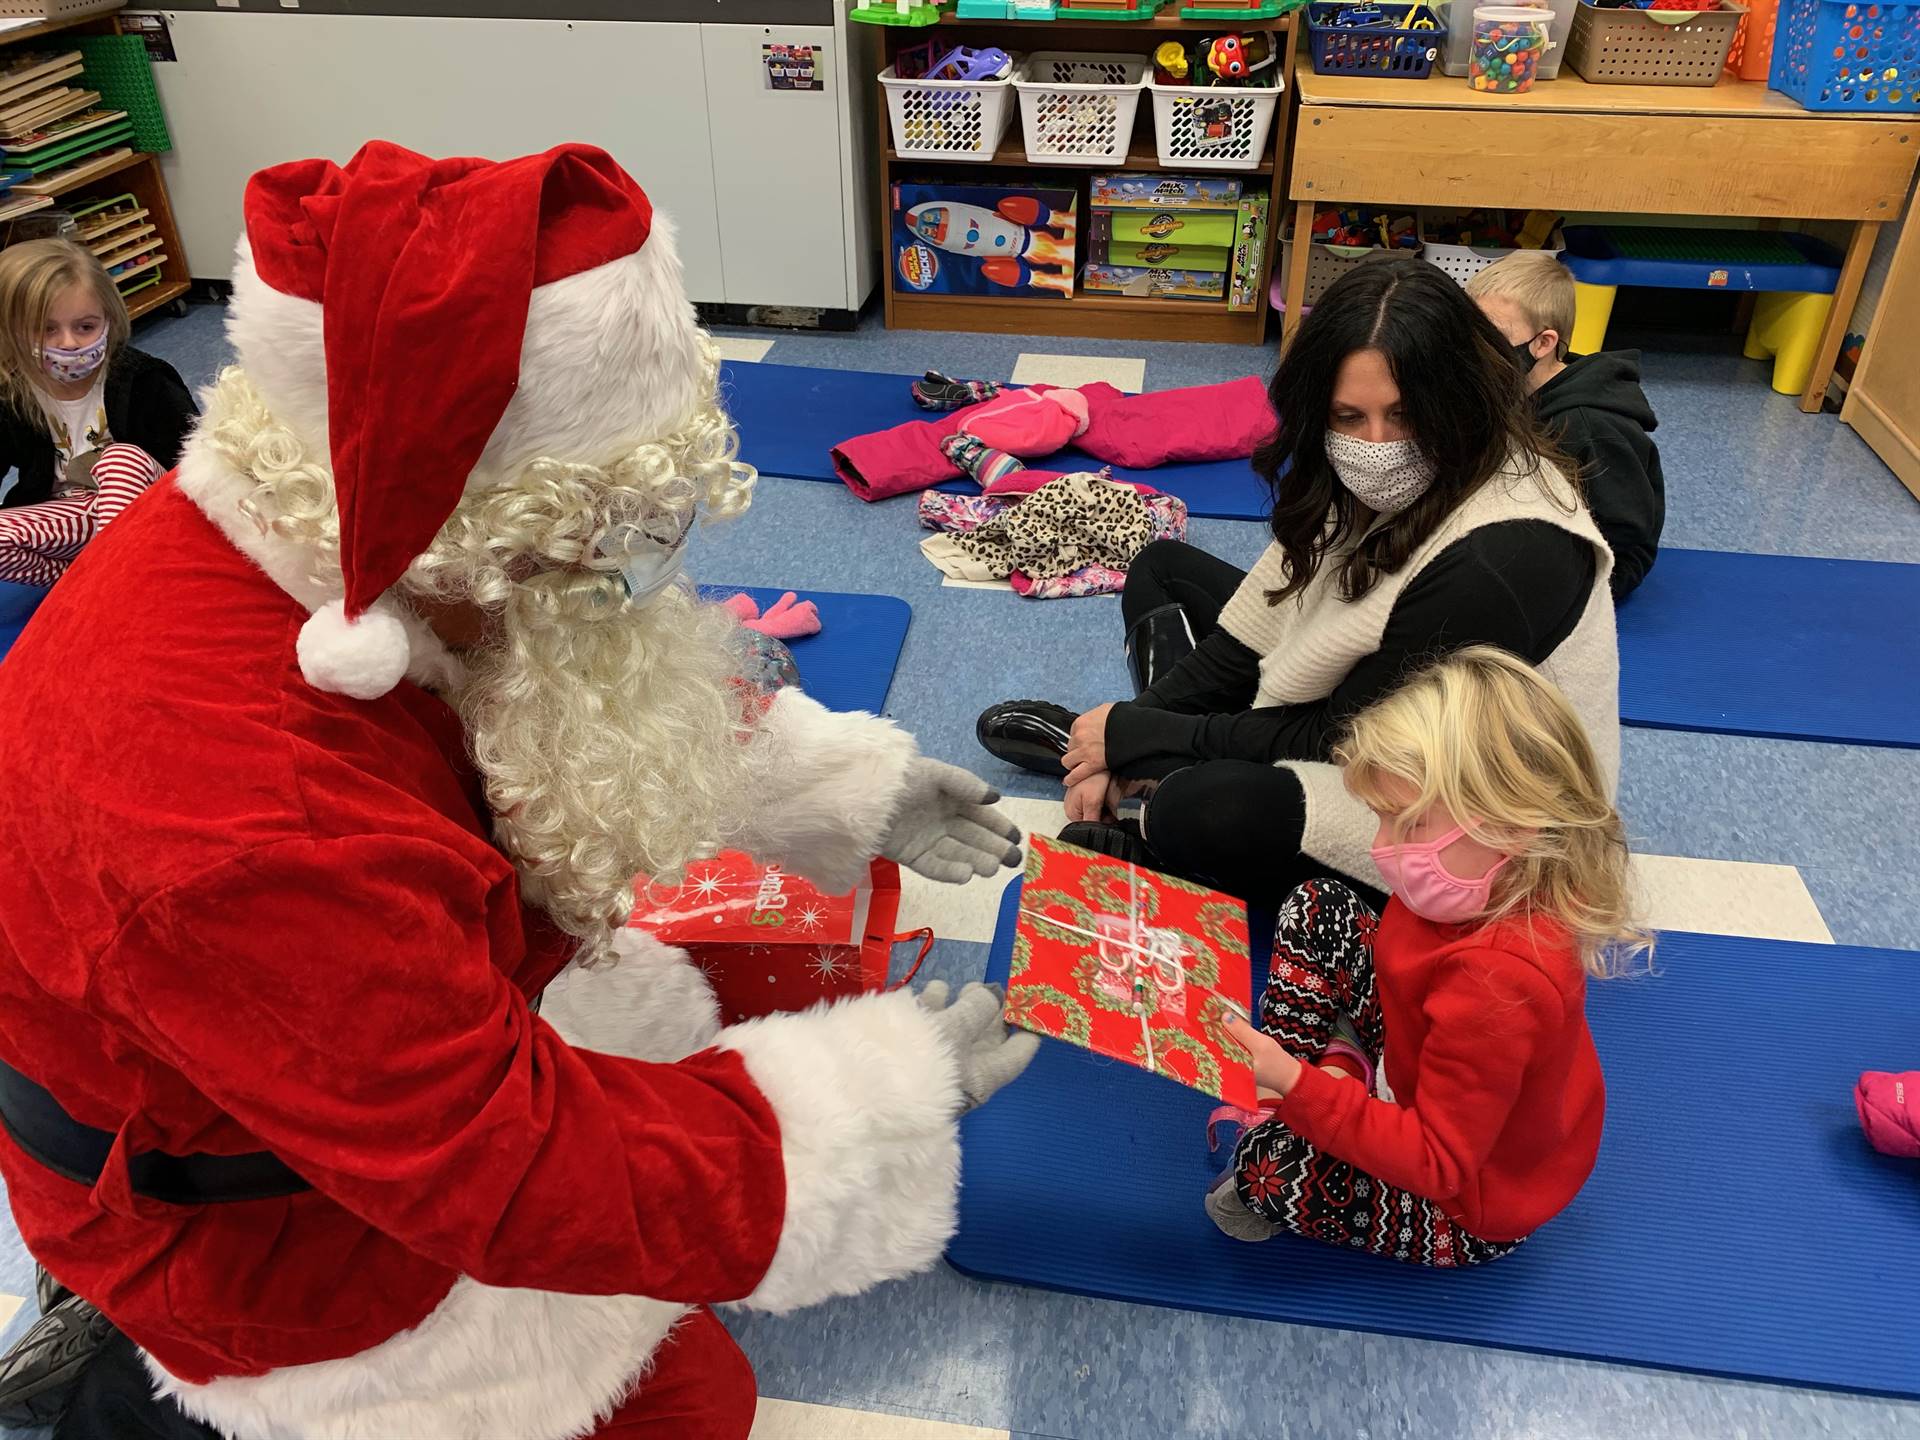 Santa gives a gift to a student while the teacher watches.